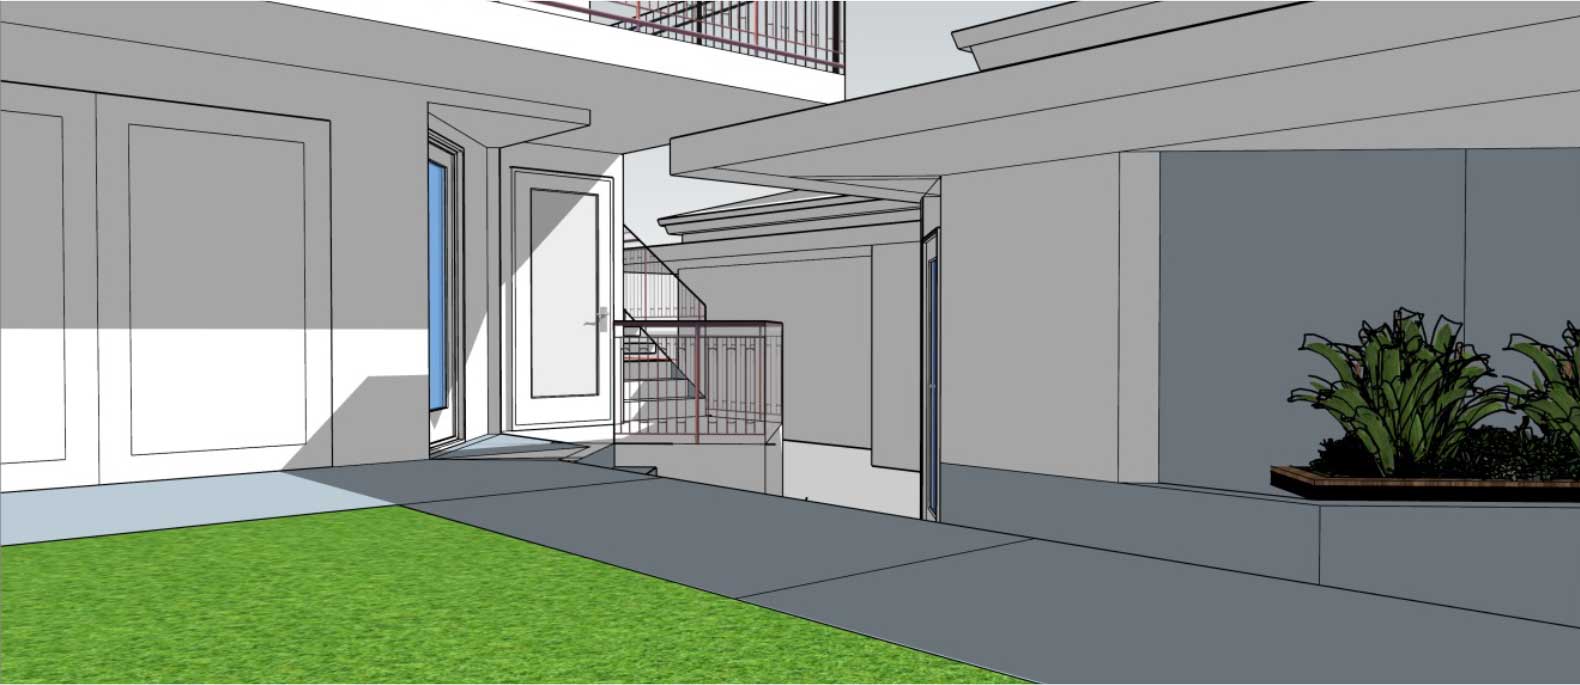 Ahuula Place Architectural Design